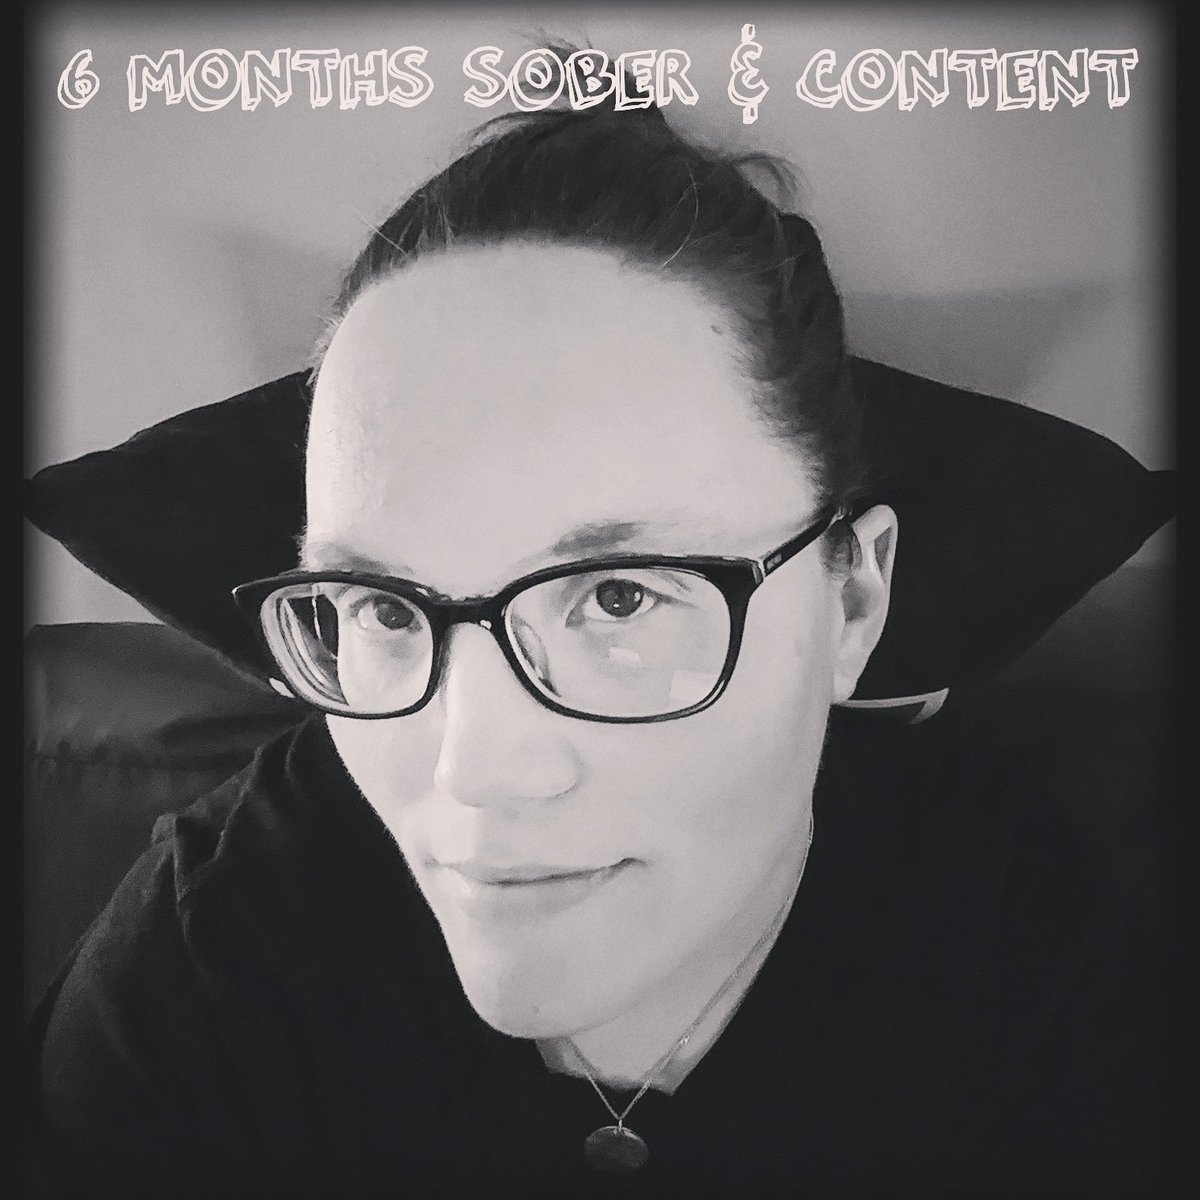 6 months sober today & content as hell tonight reading in bed.
#Sober #content #sleepy #alcoholfree #Reading #recovery #milestone #onedayatatime #6month #FOMO #seltzersquad #podcastlife #agnostic #sobriety #teetotal #teetotaler 
#soberliving #womeninrecovery #womenshealth